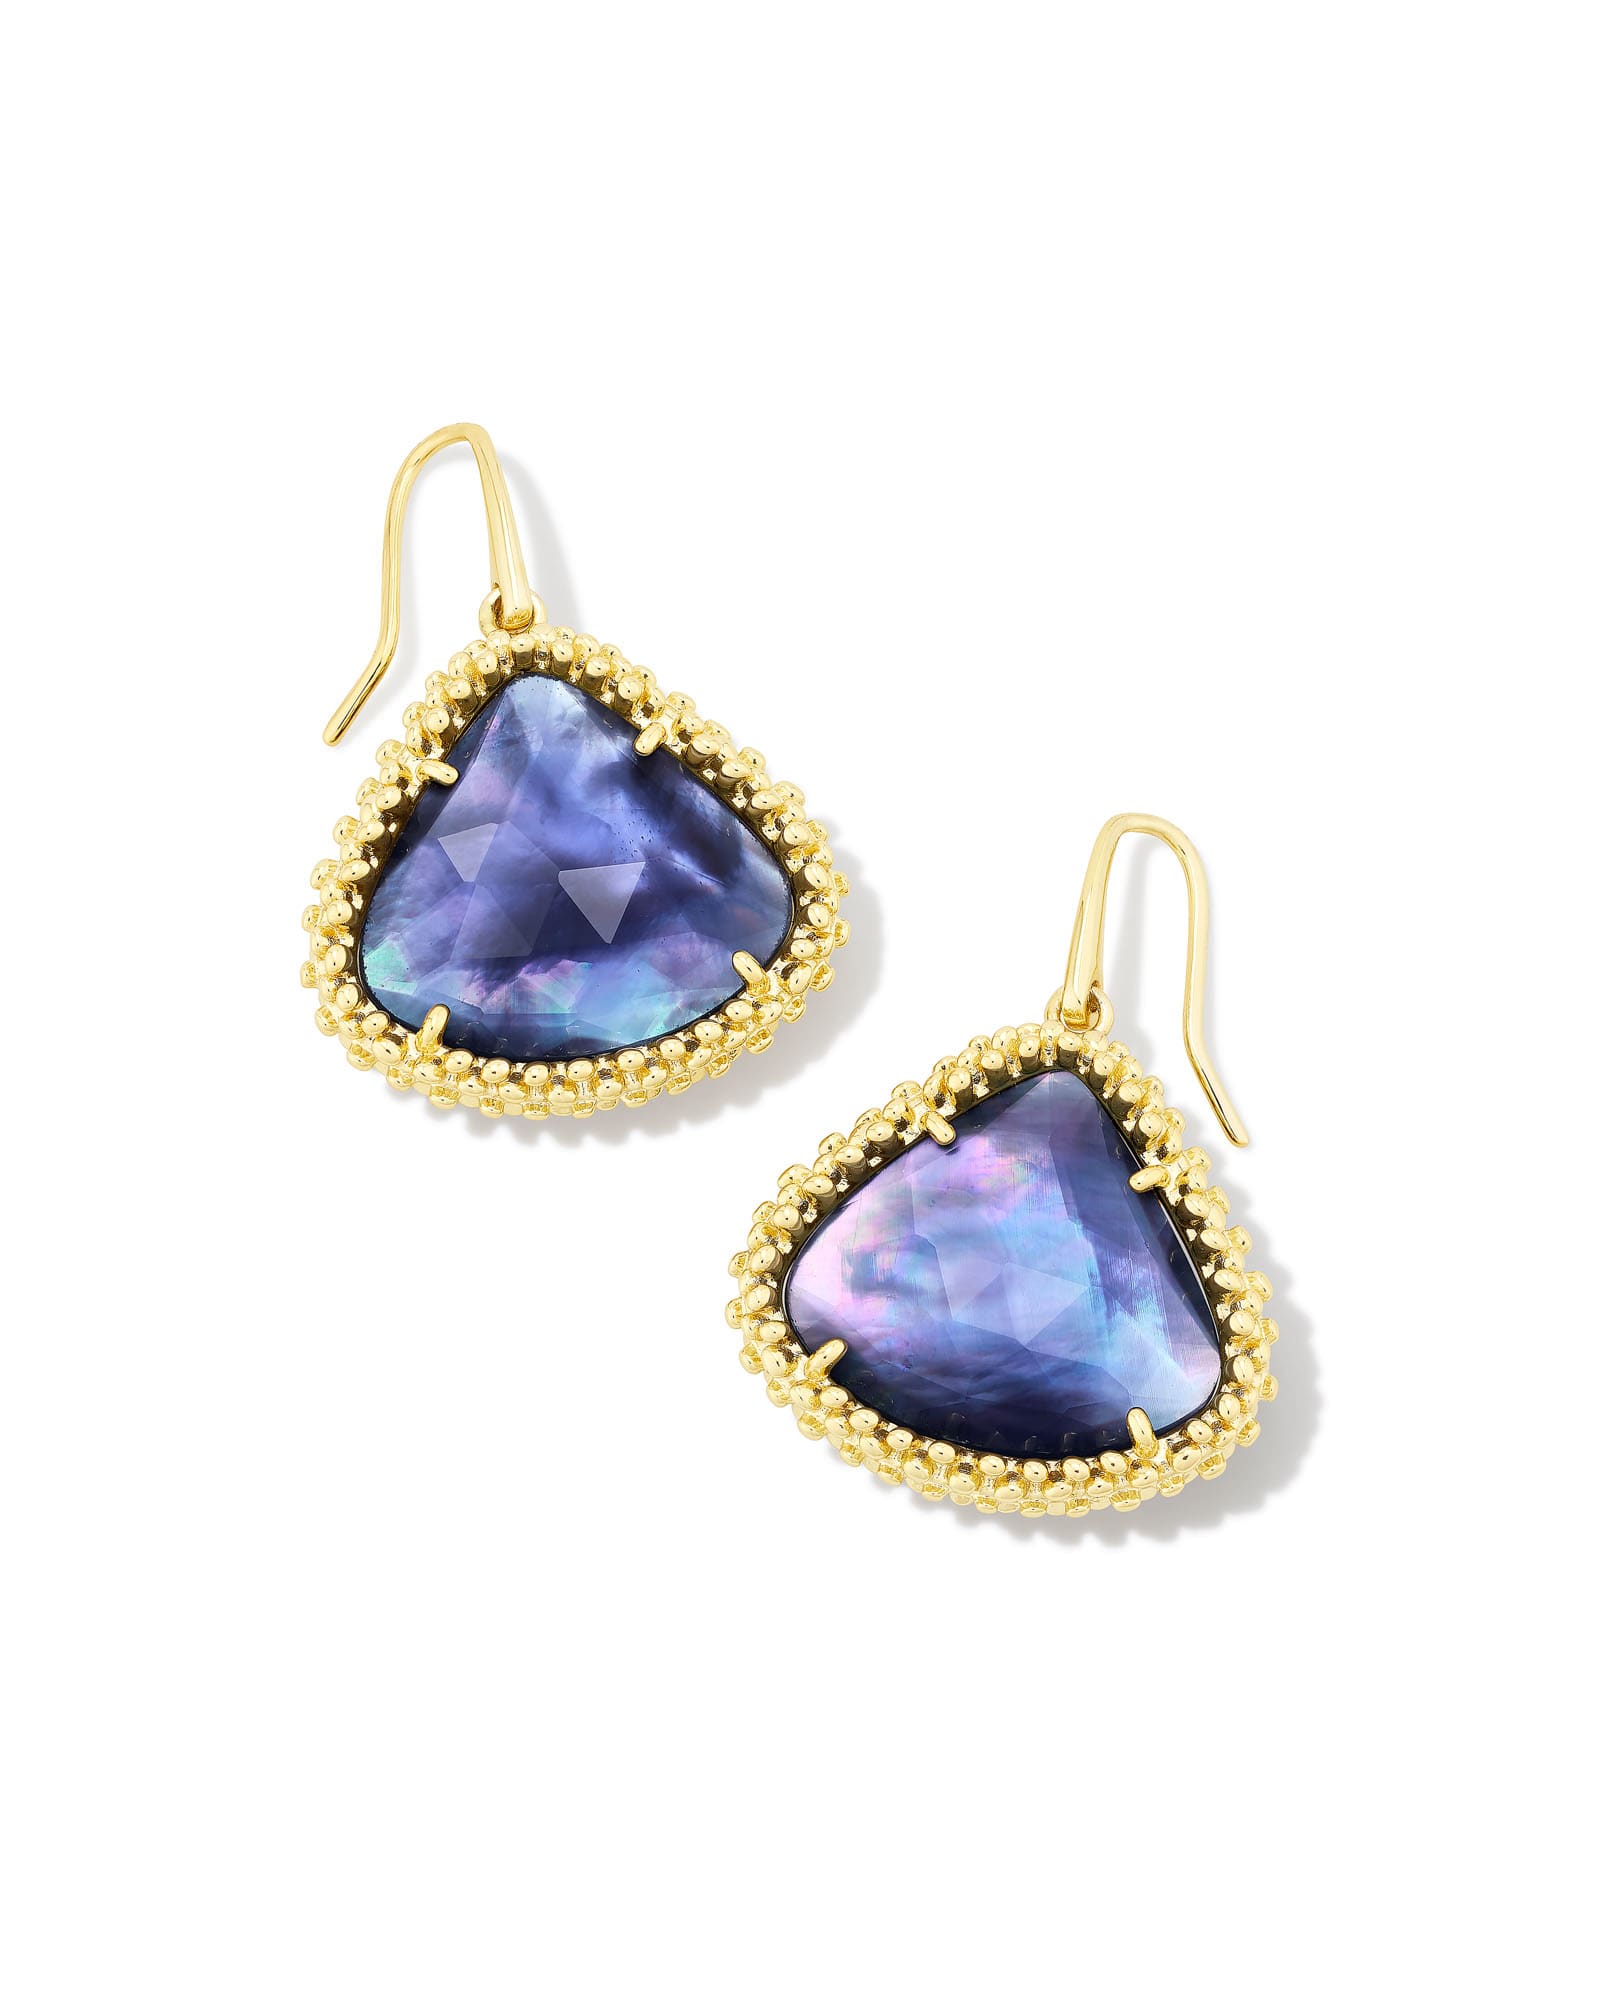 Kendra Scott Framed Kendall Gold Large Drop Earrings in Dark Lavender Illusion | Glass/Mother Of Pearl